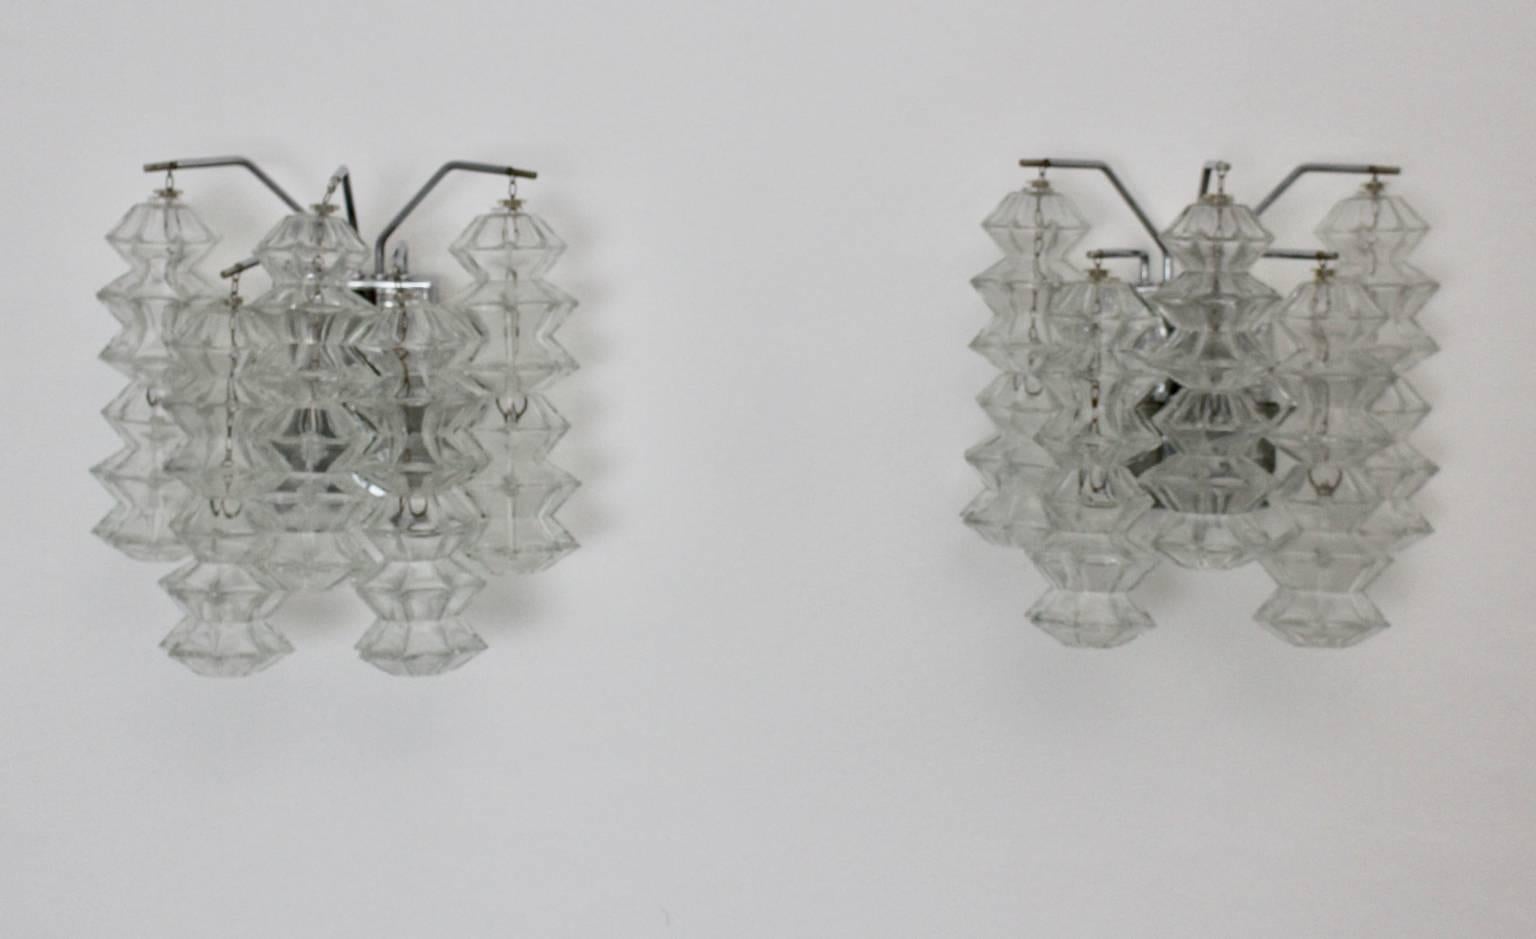 Mid Century Modern vintage glass chromed metal pair of  Pagoda sconces  by Kalmar, circa 1969, Vienna 
Each sconce shows ten pagoda shaped glasses and three sockets Edison E 14.

The condition of the sconces is very good with very minor signs of age